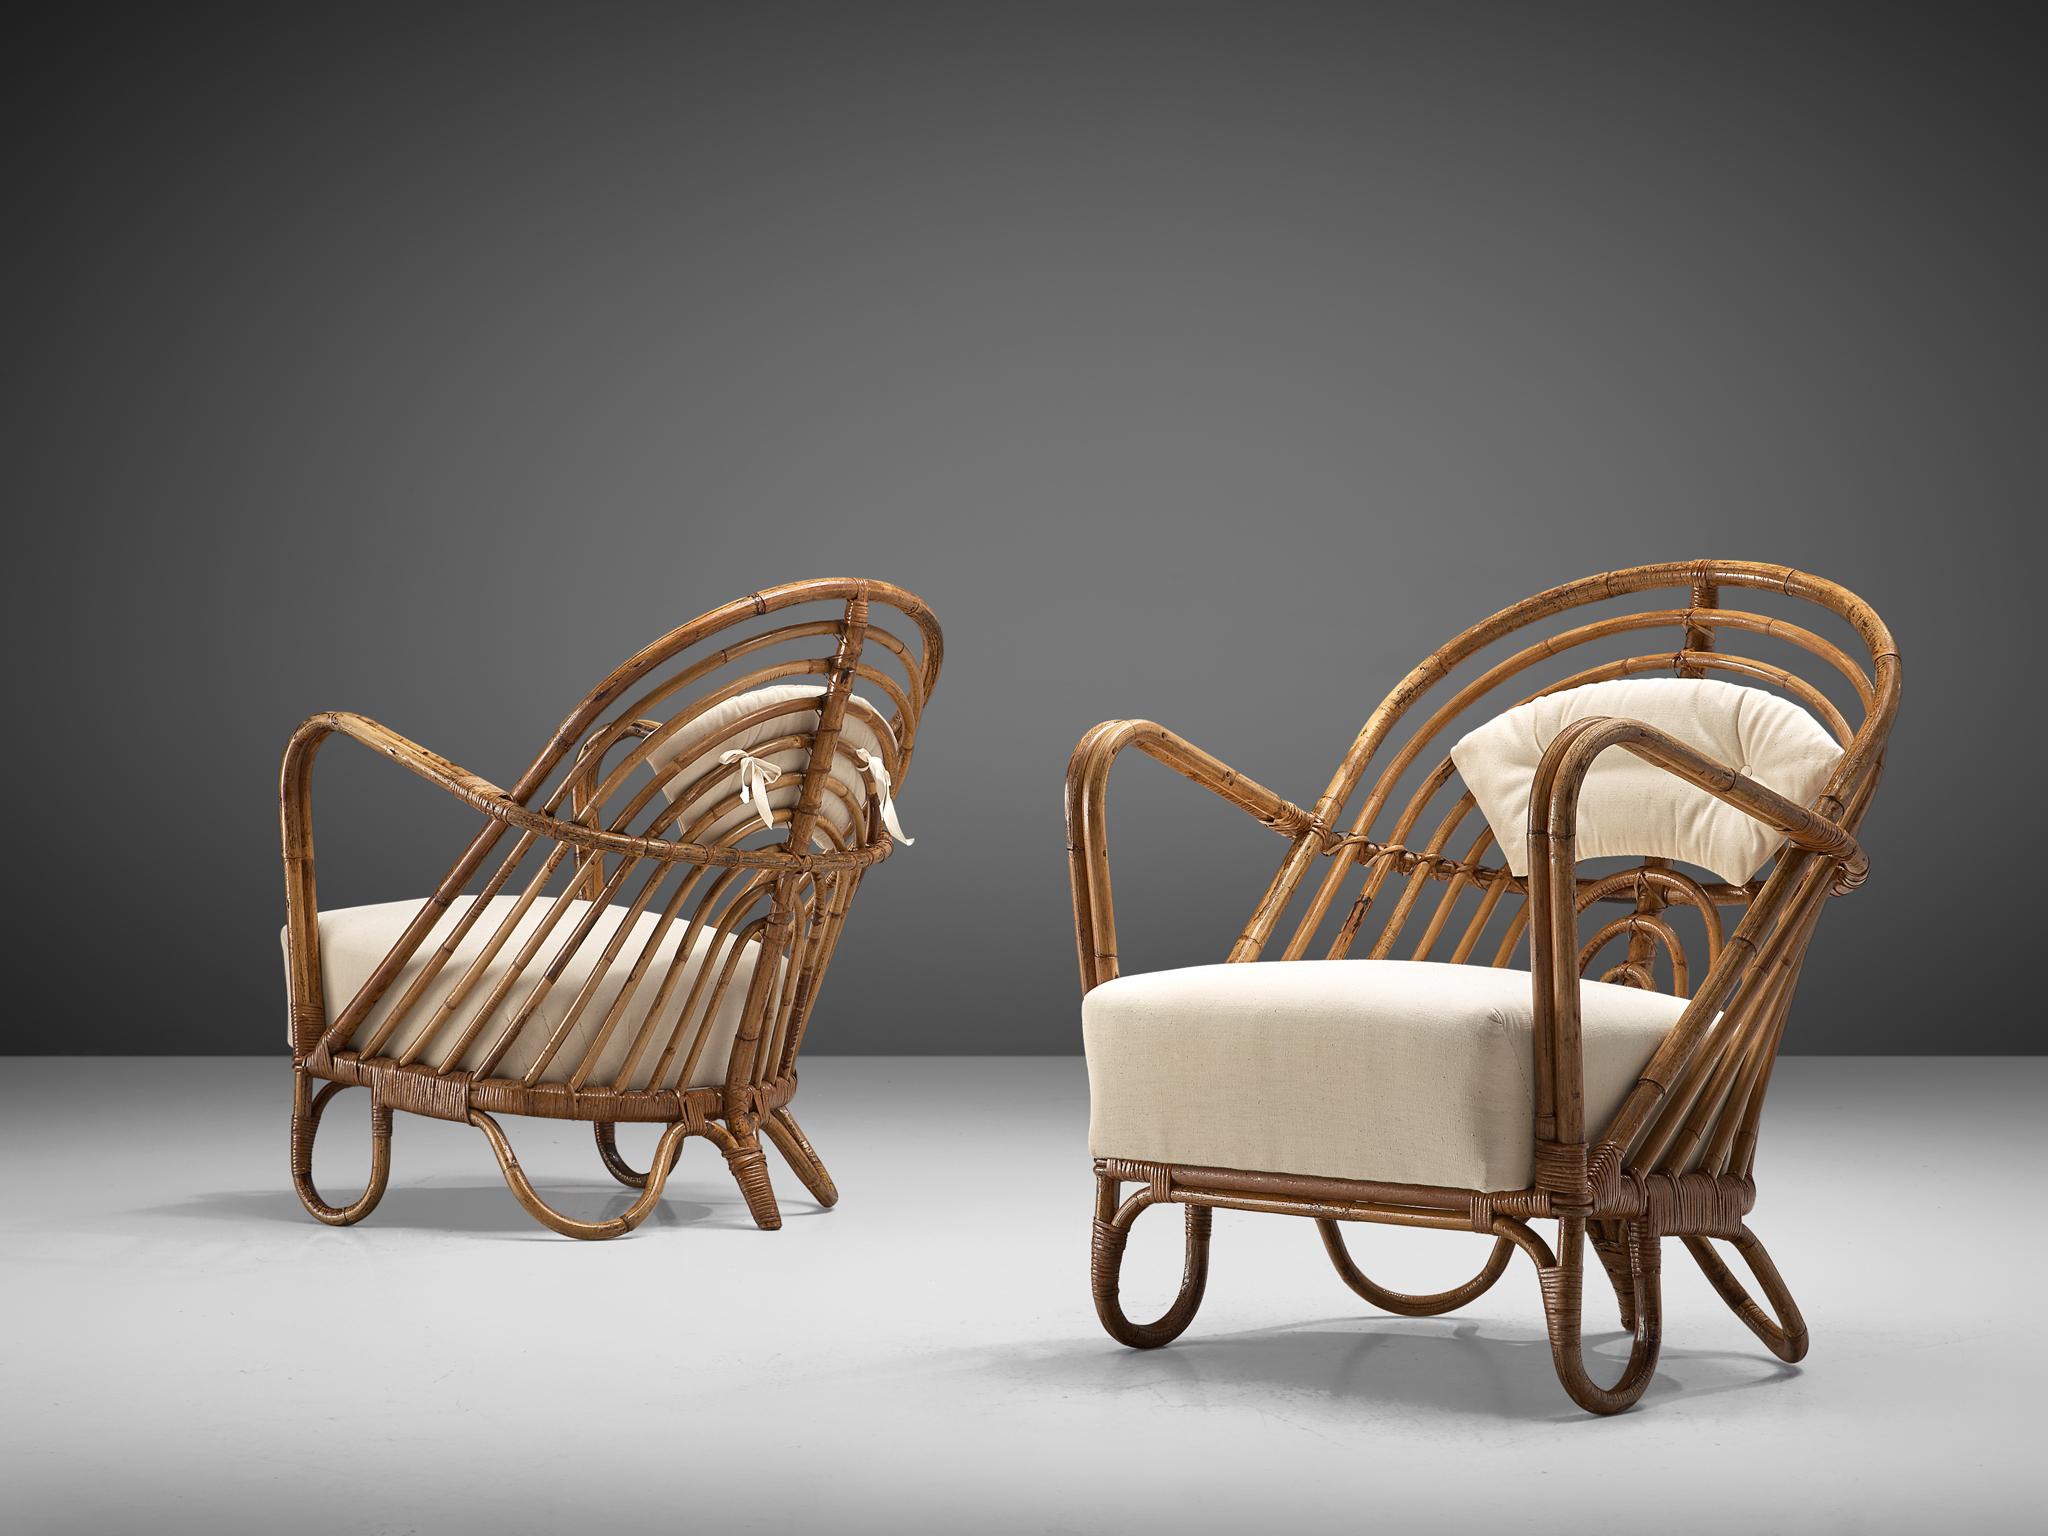 Danish Rattan Lounge Set with Eggshell White Upholstery, 1940s (Stoff)